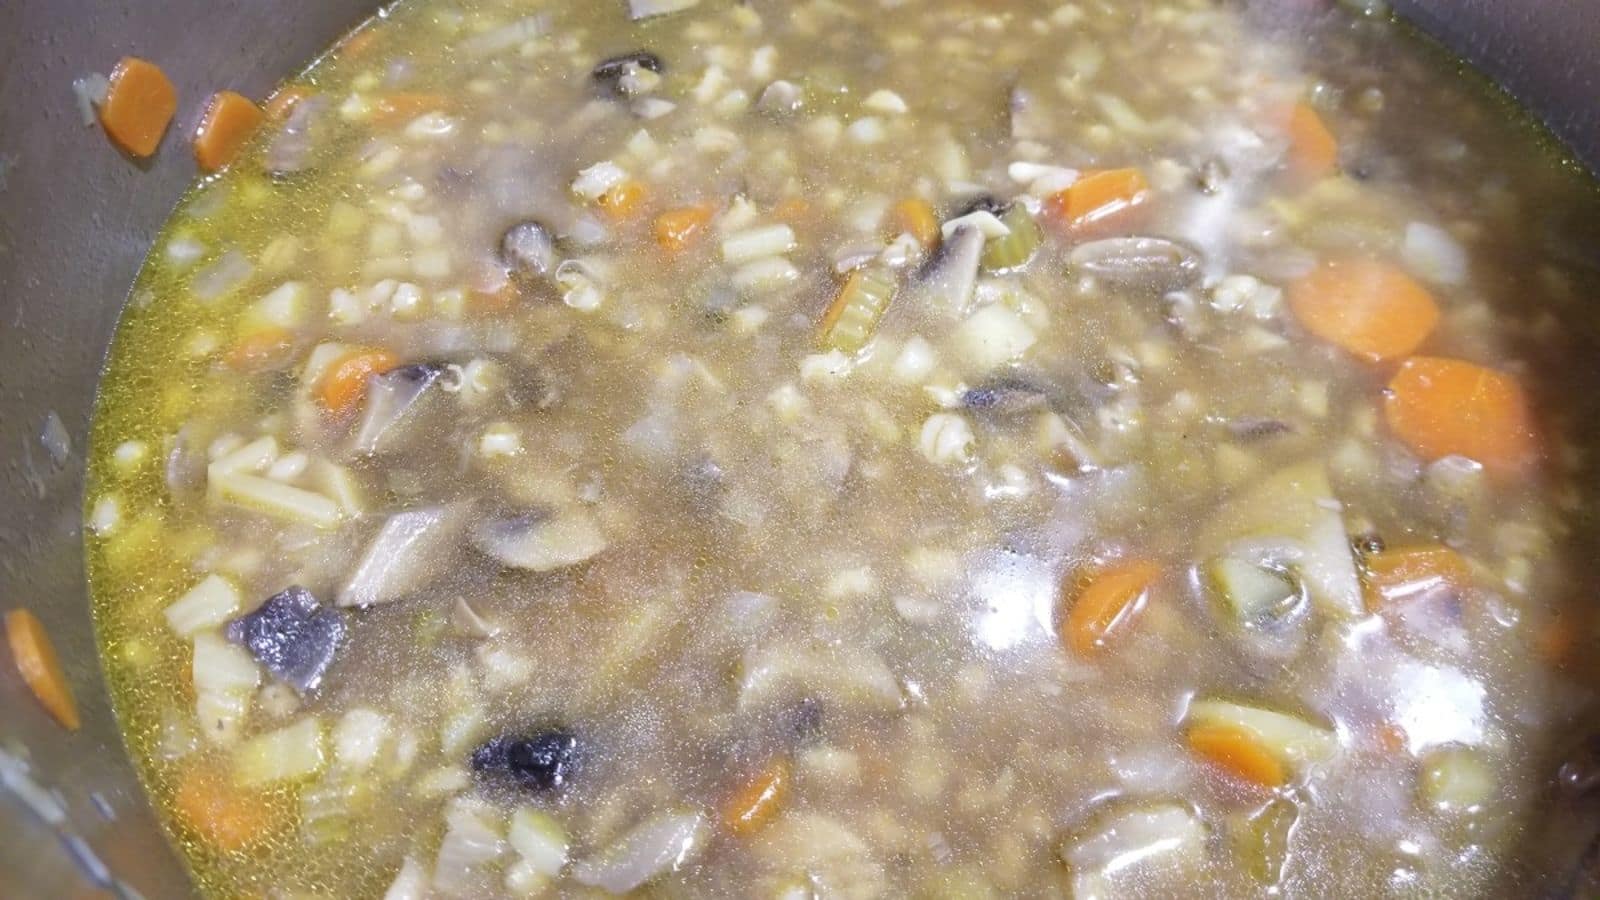 Impress your guests with this Czech mushroom barley soup